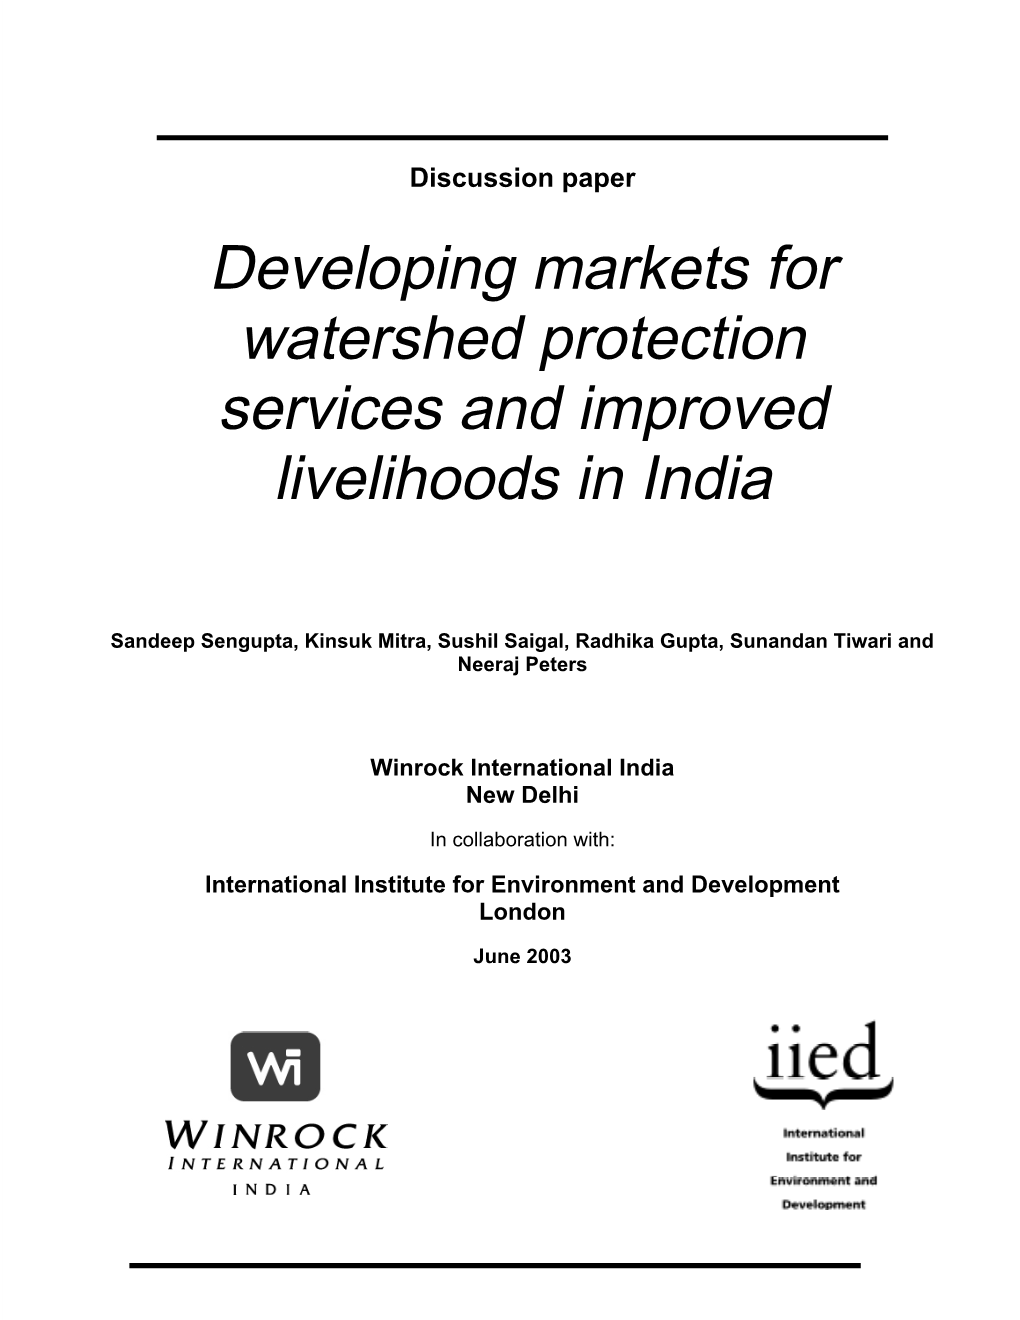 Developing Markets for Watershed Protection Services and Improved Livelihoods in India